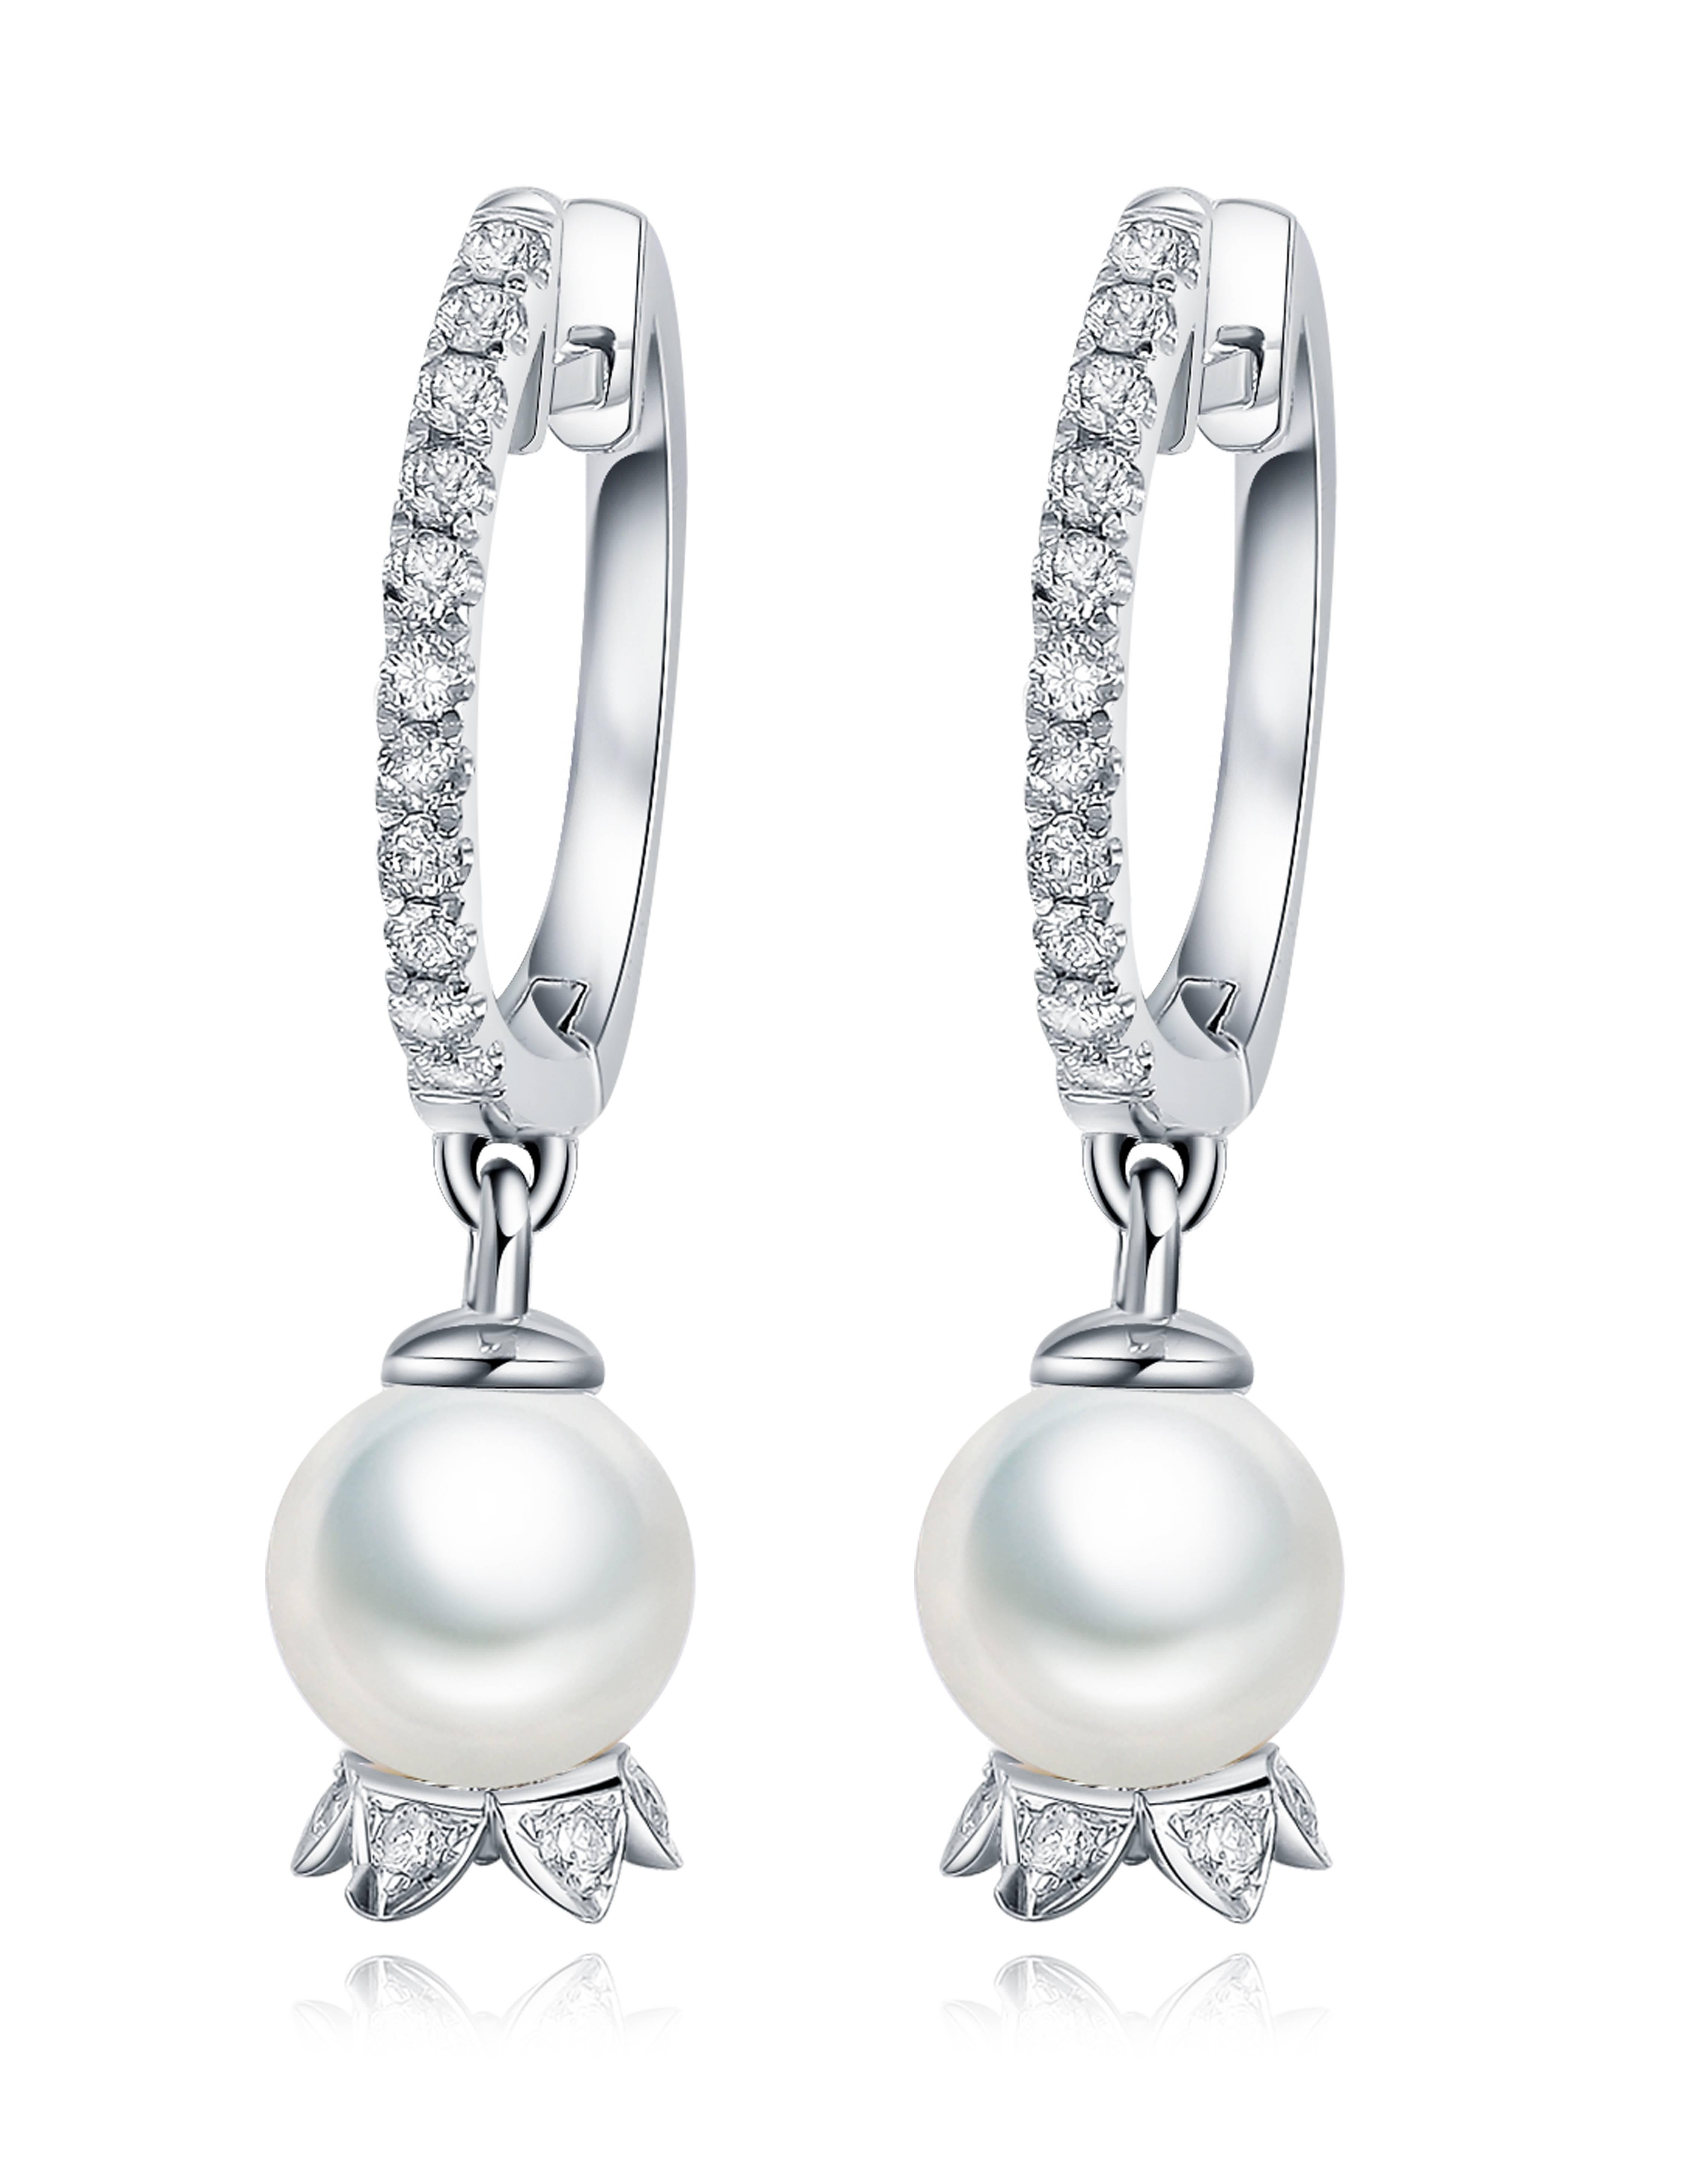 Description:
Lily of the Valley pearl drop earrings with 6mm pearls and 0.211ct white diamonds, set in 9ct white gold.

Inspiration:
The lily of the valley flower is one of the most beloved, opulent wedding flowers, which symbolises purity and